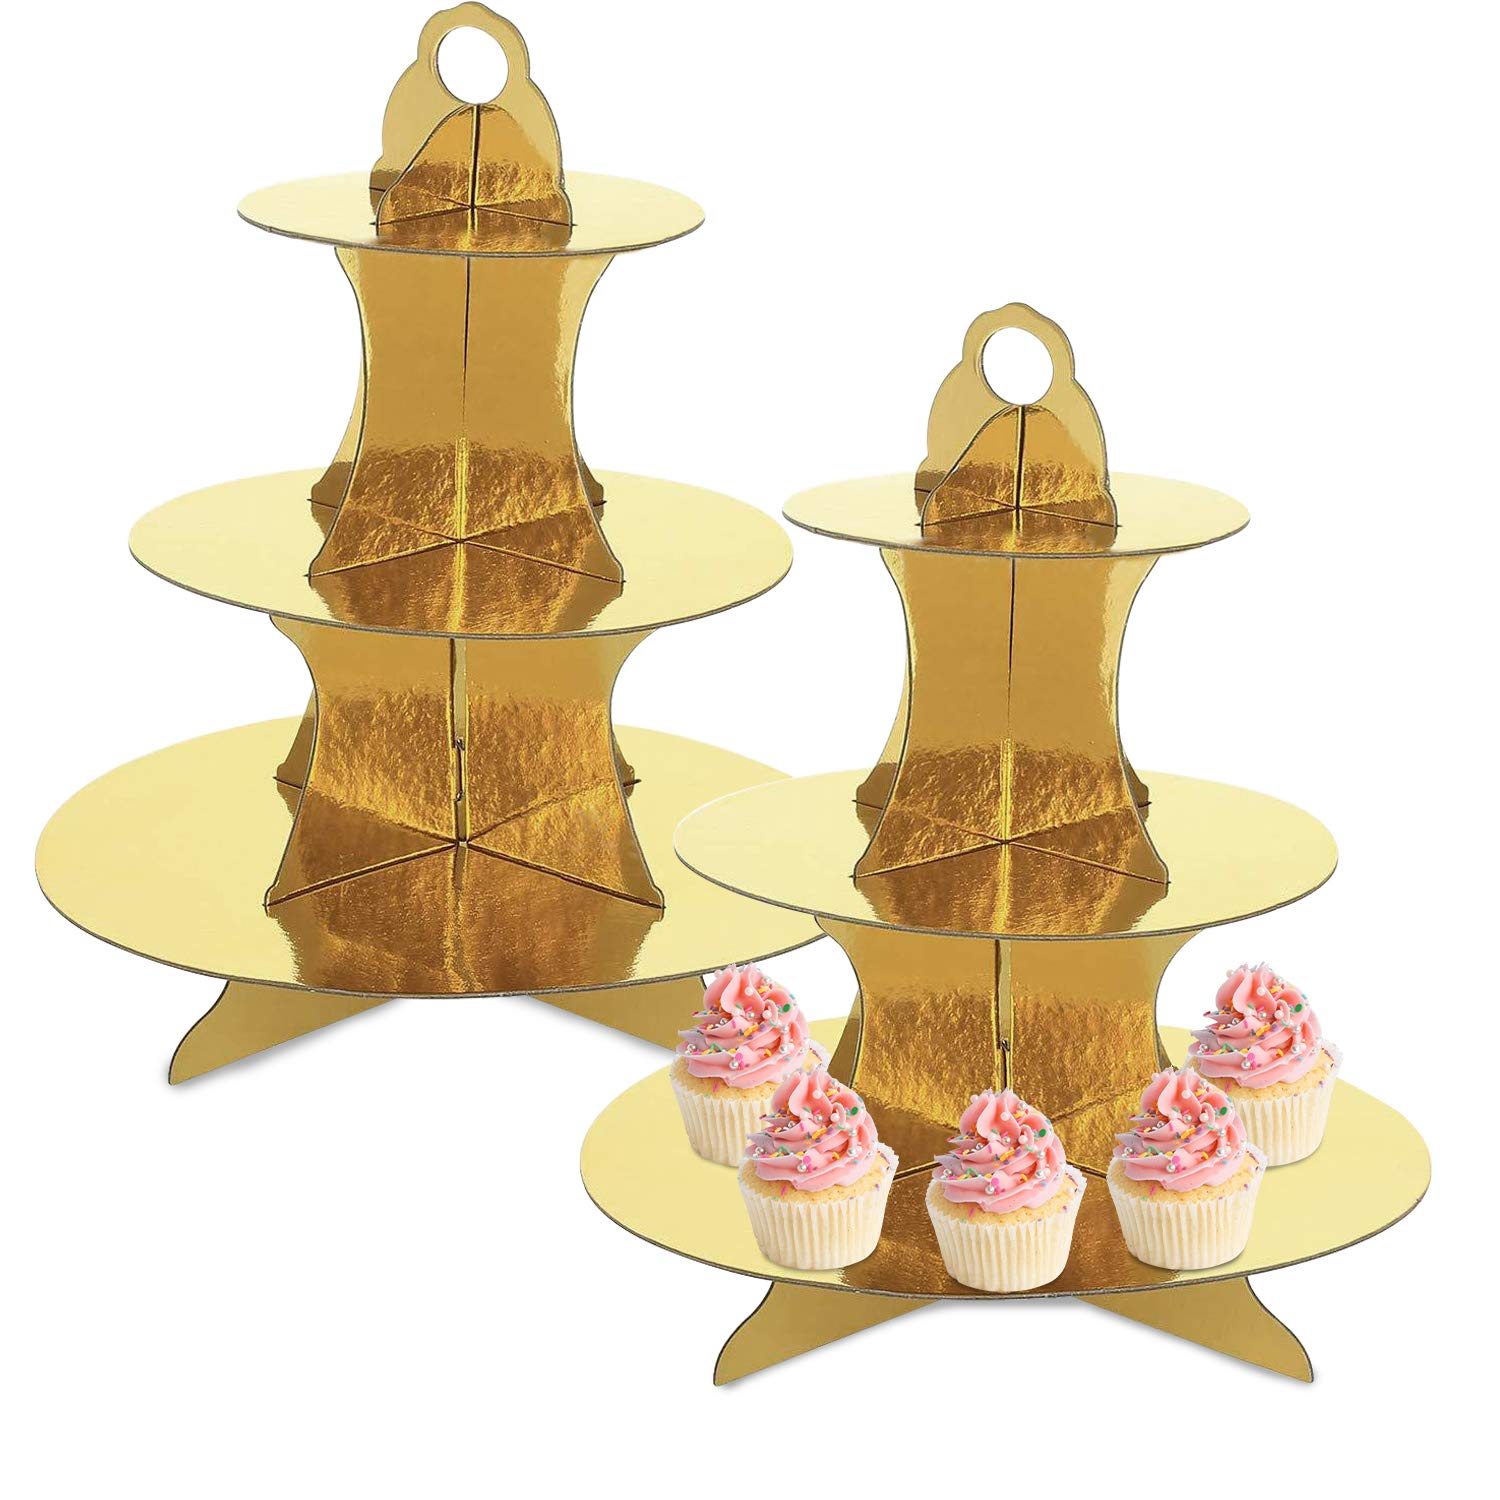 Lainrrew 3-Tier Gold Cupcake Stand, Reusable and Portable, Easy to Assemble